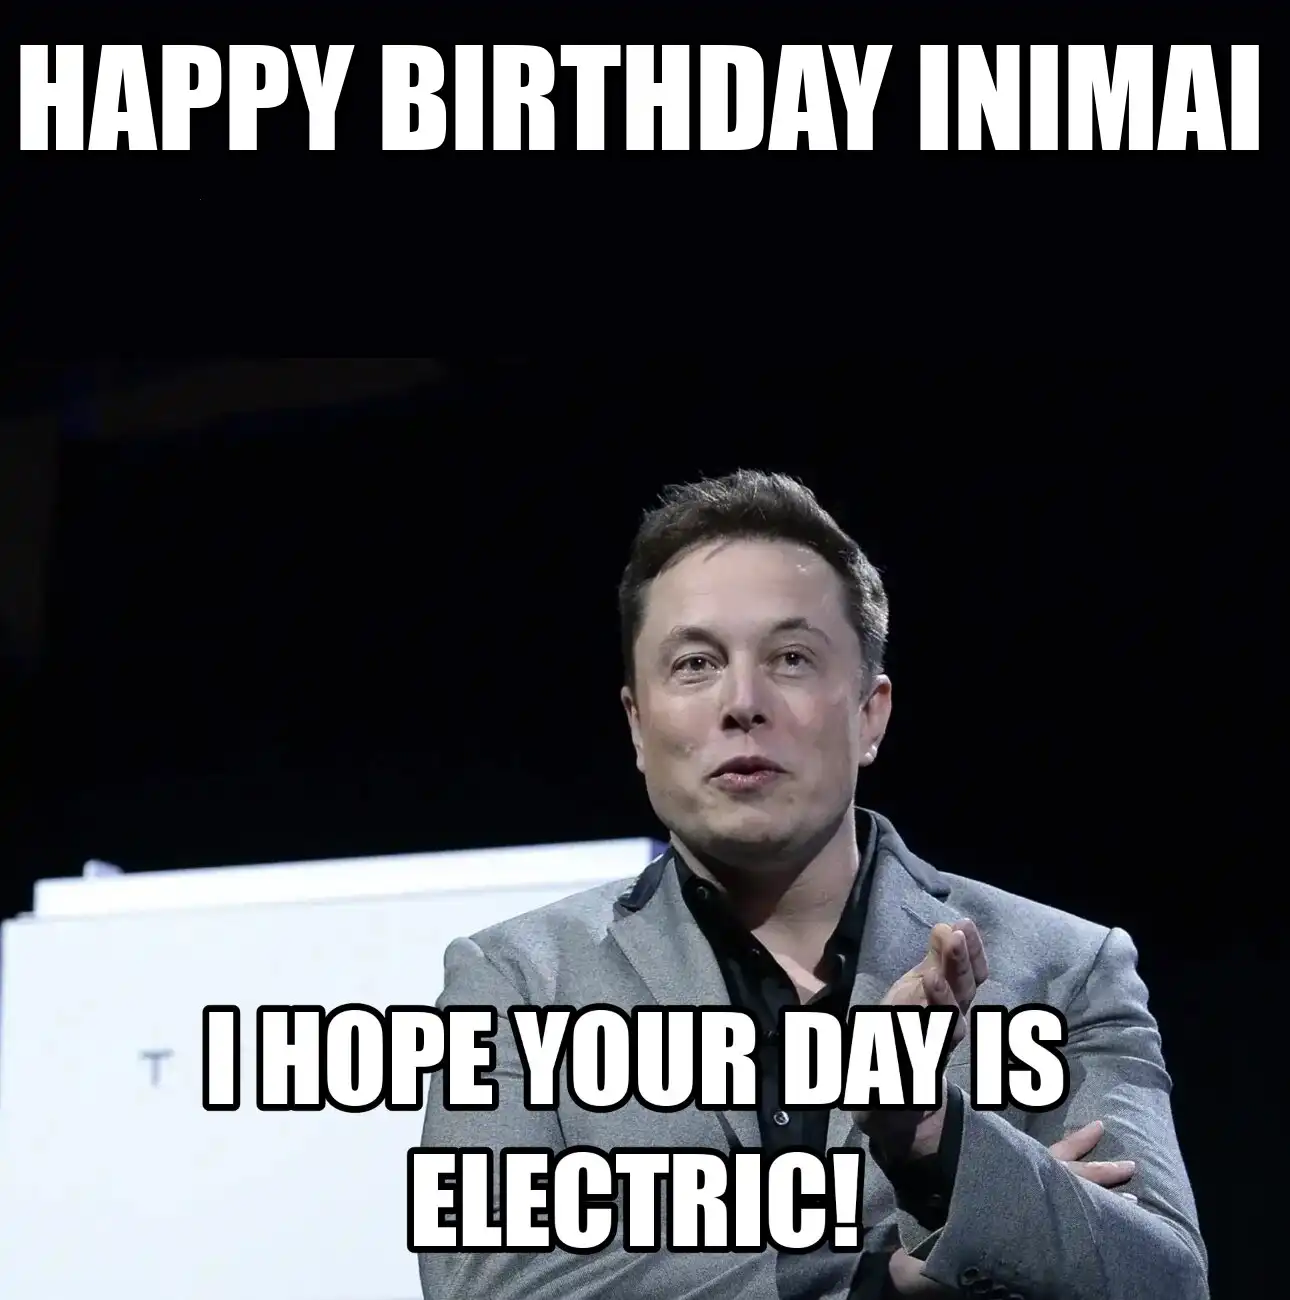 Happy Birthday Inimai I Hope Your Day Is Electric Meme